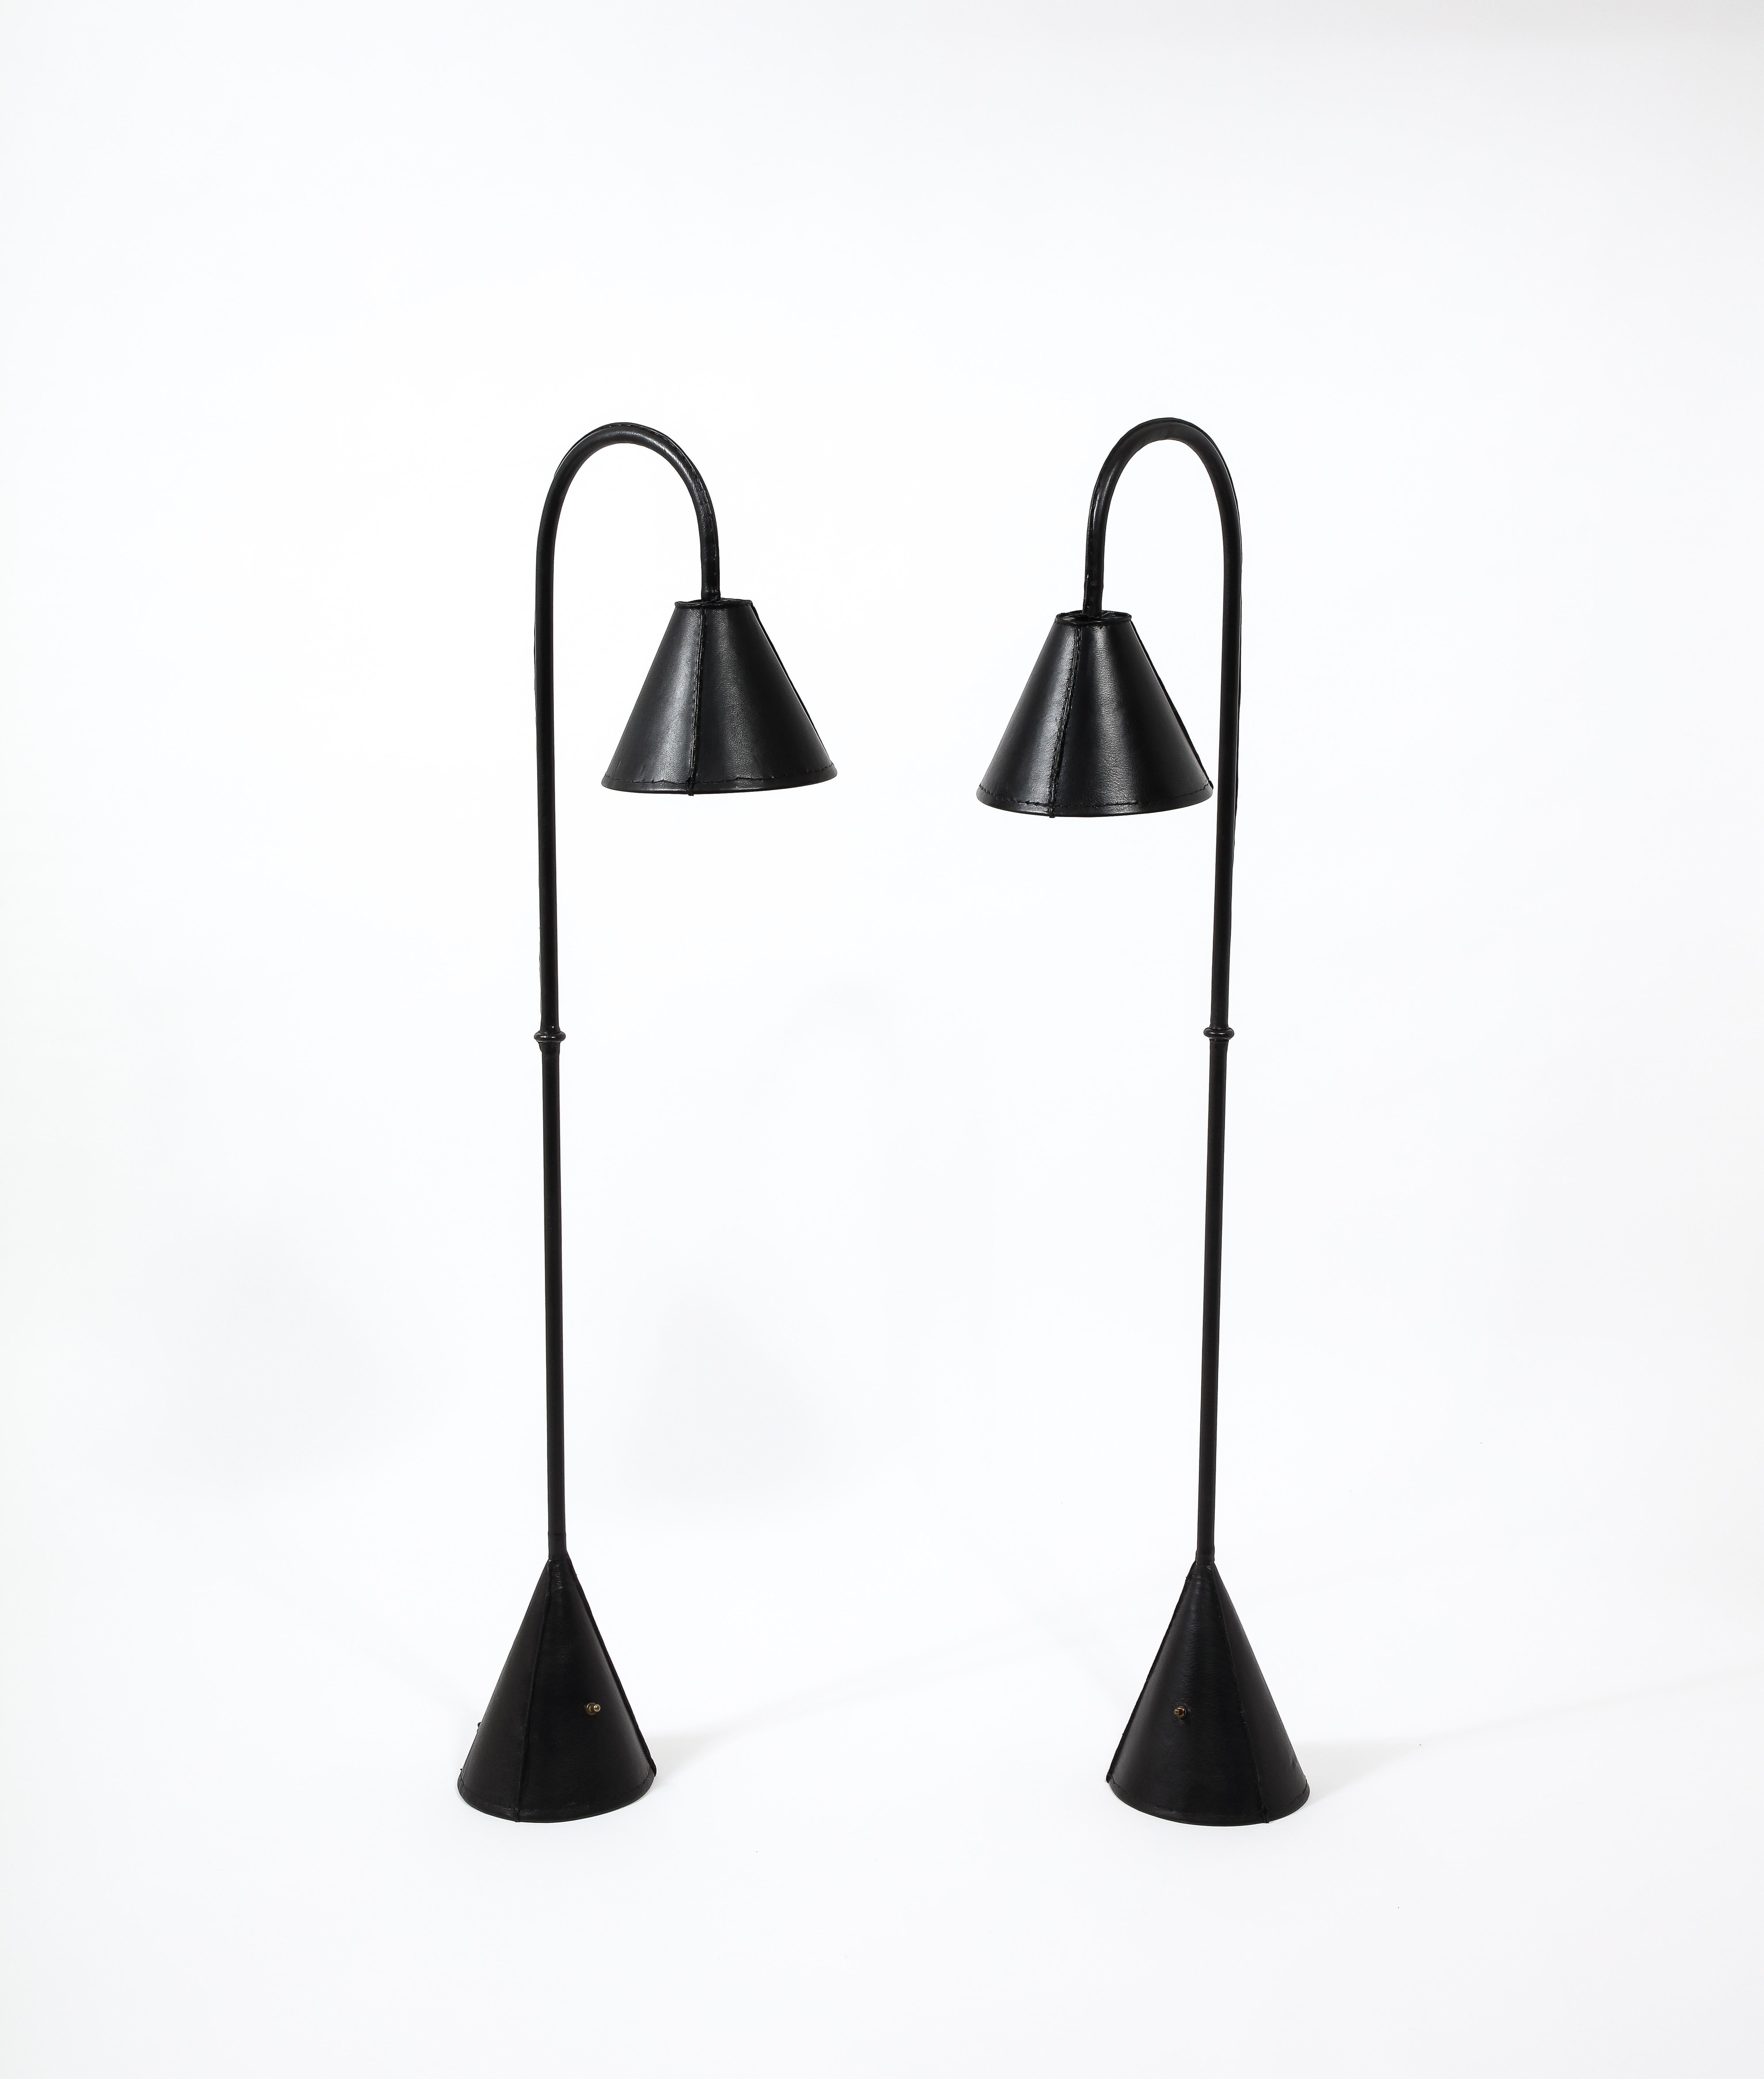 Matched pair of black leather stitched floor lamps in excellent condition with weighted bases. Rewired.